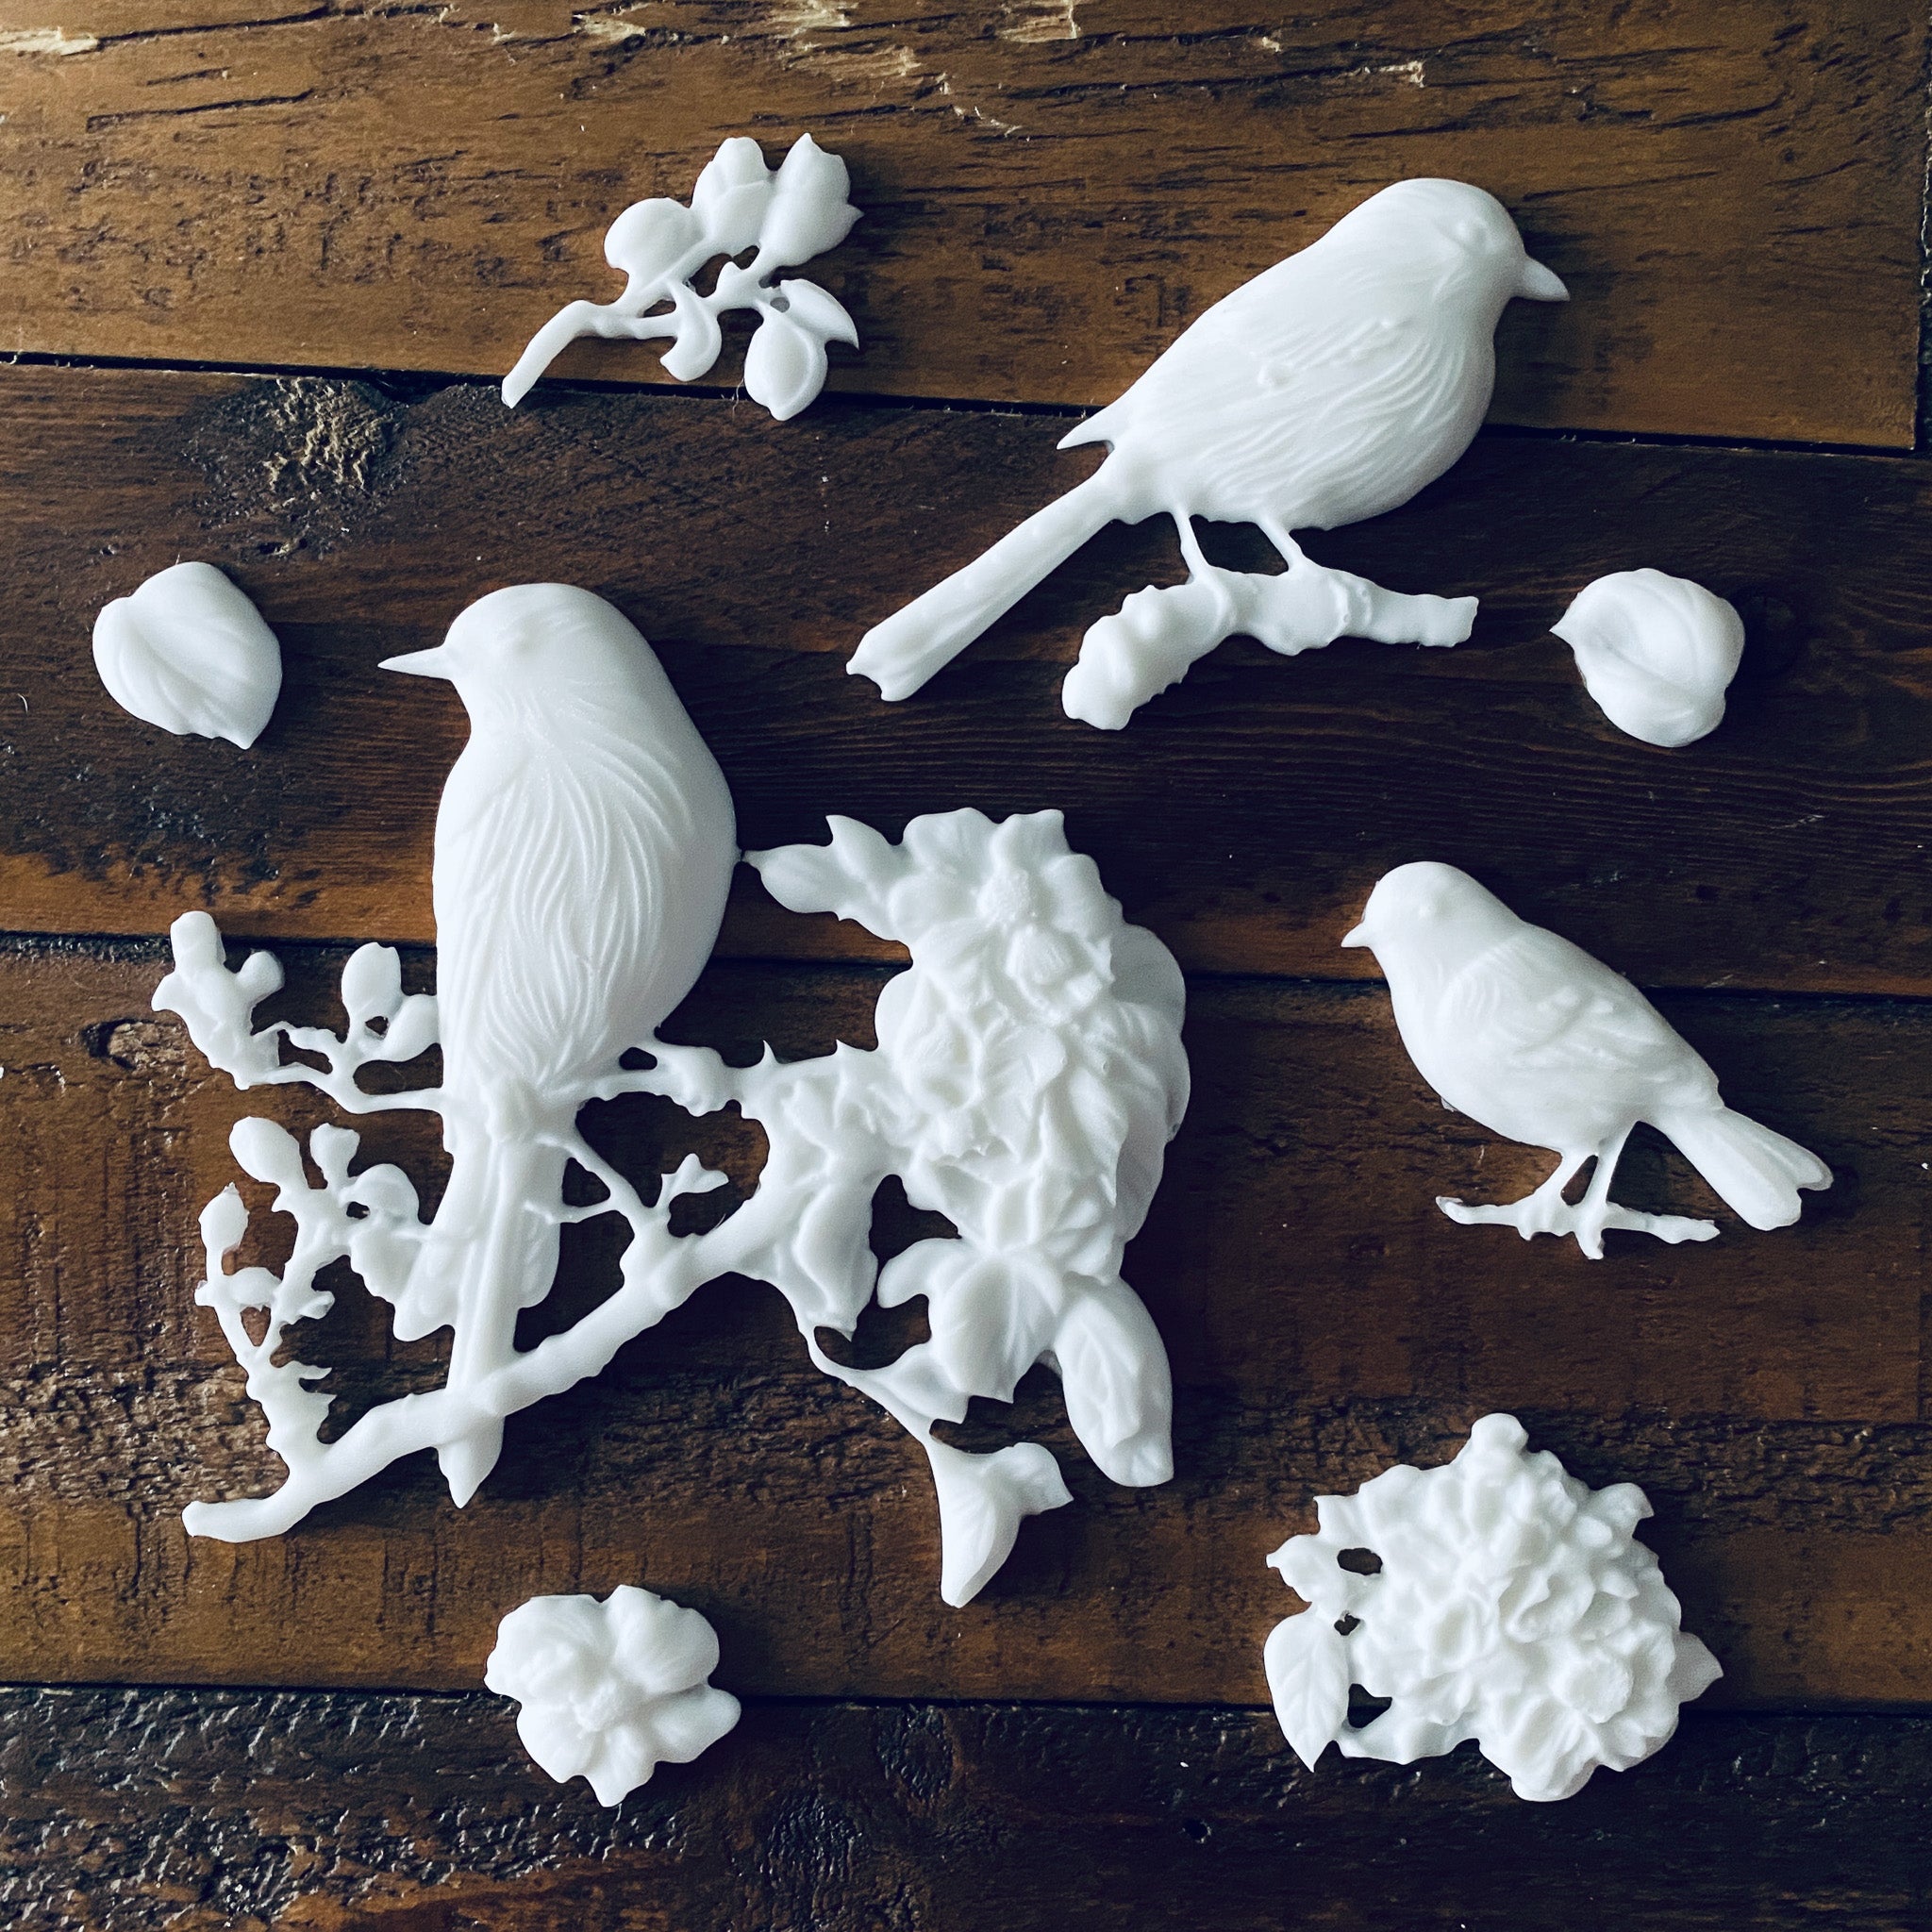 White resin castings against a wood background of 3 birds, 2 on branches, and some loose leaves and flowers made from LeBlanche's Spring Birds silicone mold.